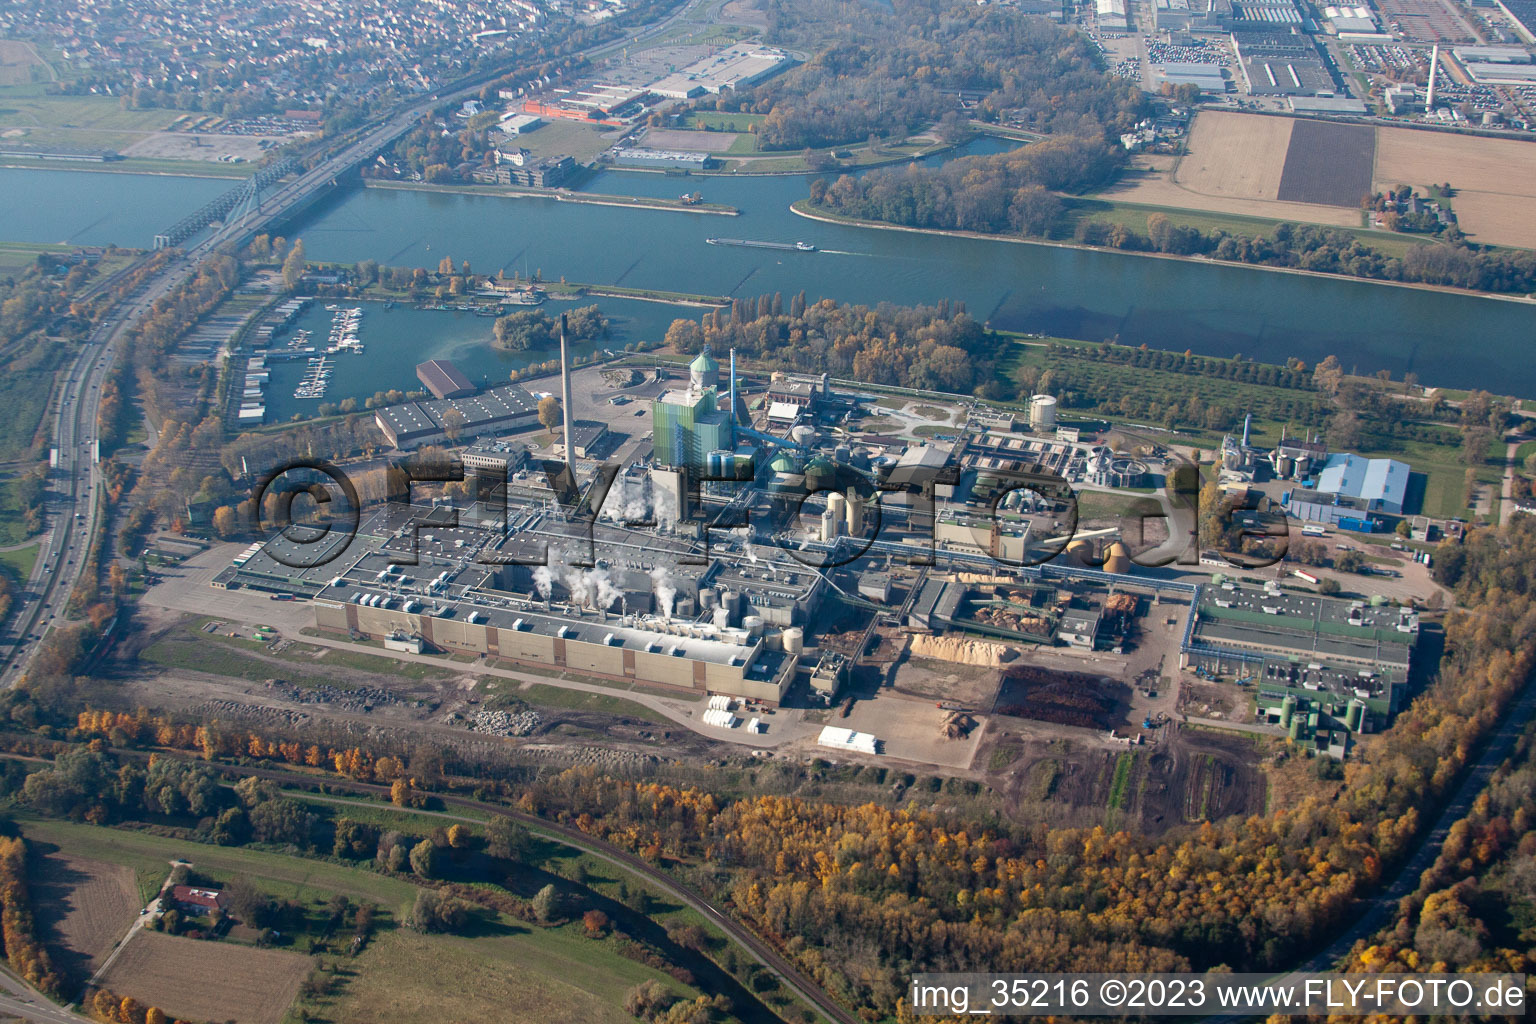 Aerial view of Stora Enso in the district Rheinhafen in Karlsruhe in the state Baden-Wuerttemberg, Germany